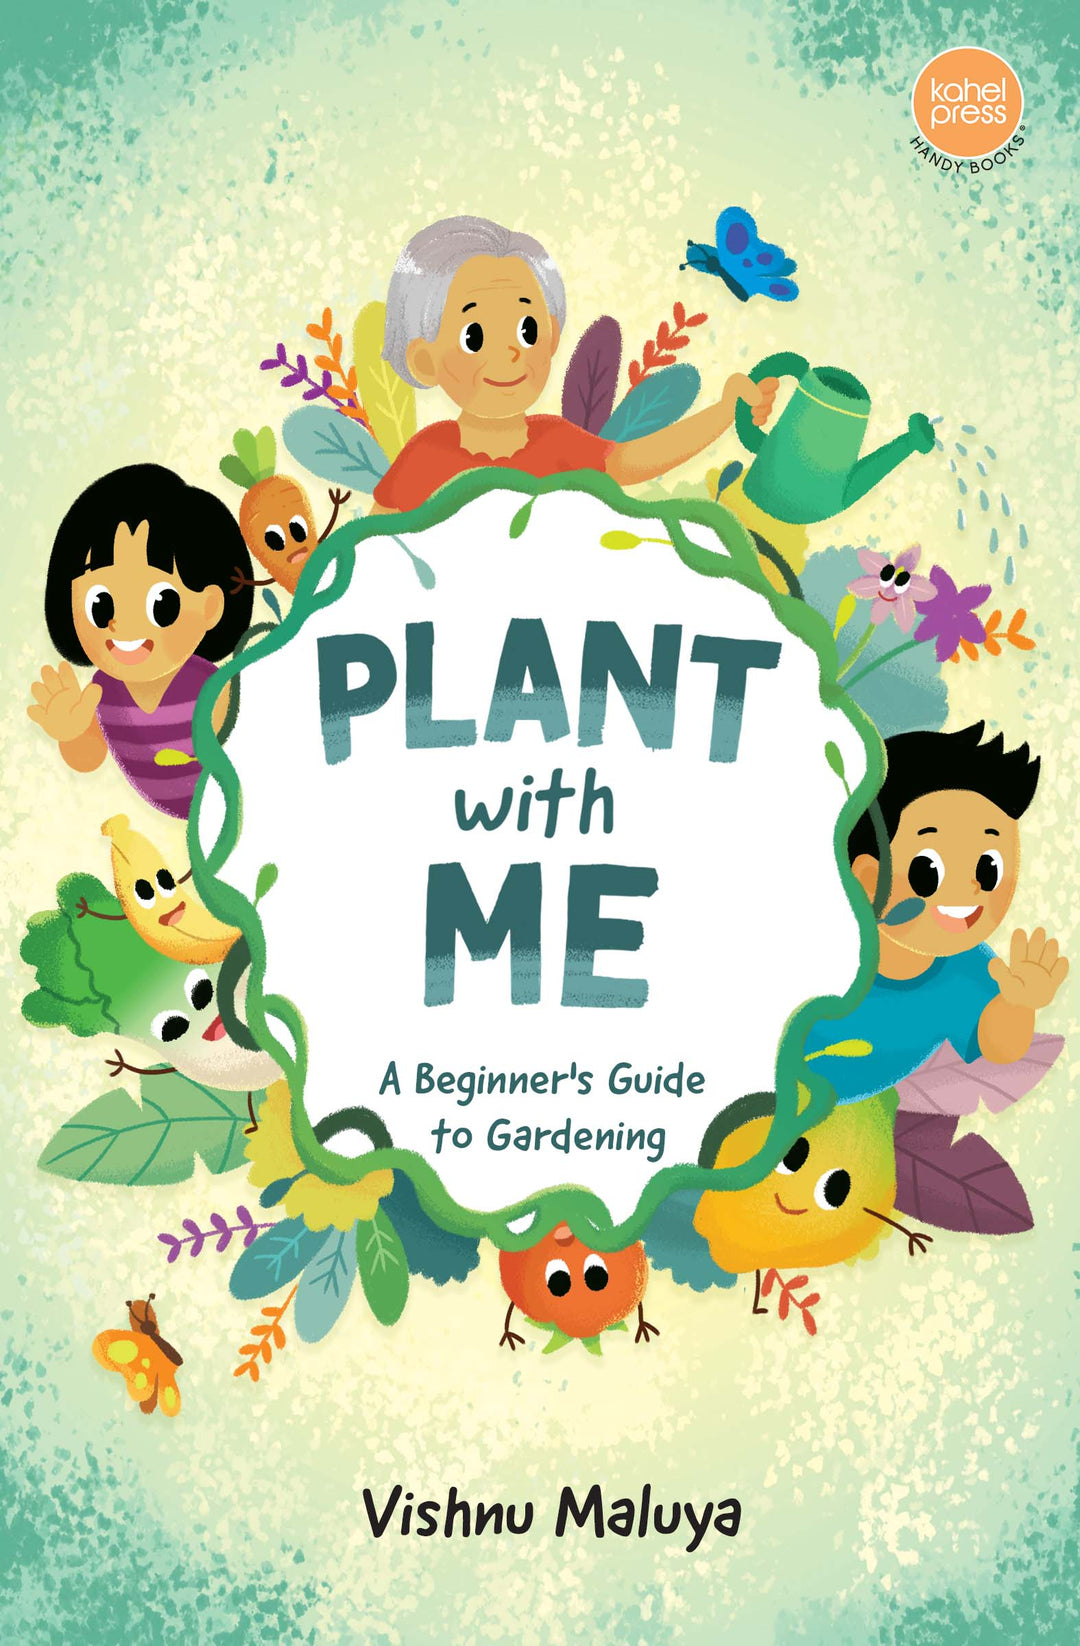 Plant with Me: A Beginner’s Guide to Gardening by Vishnu Maluya